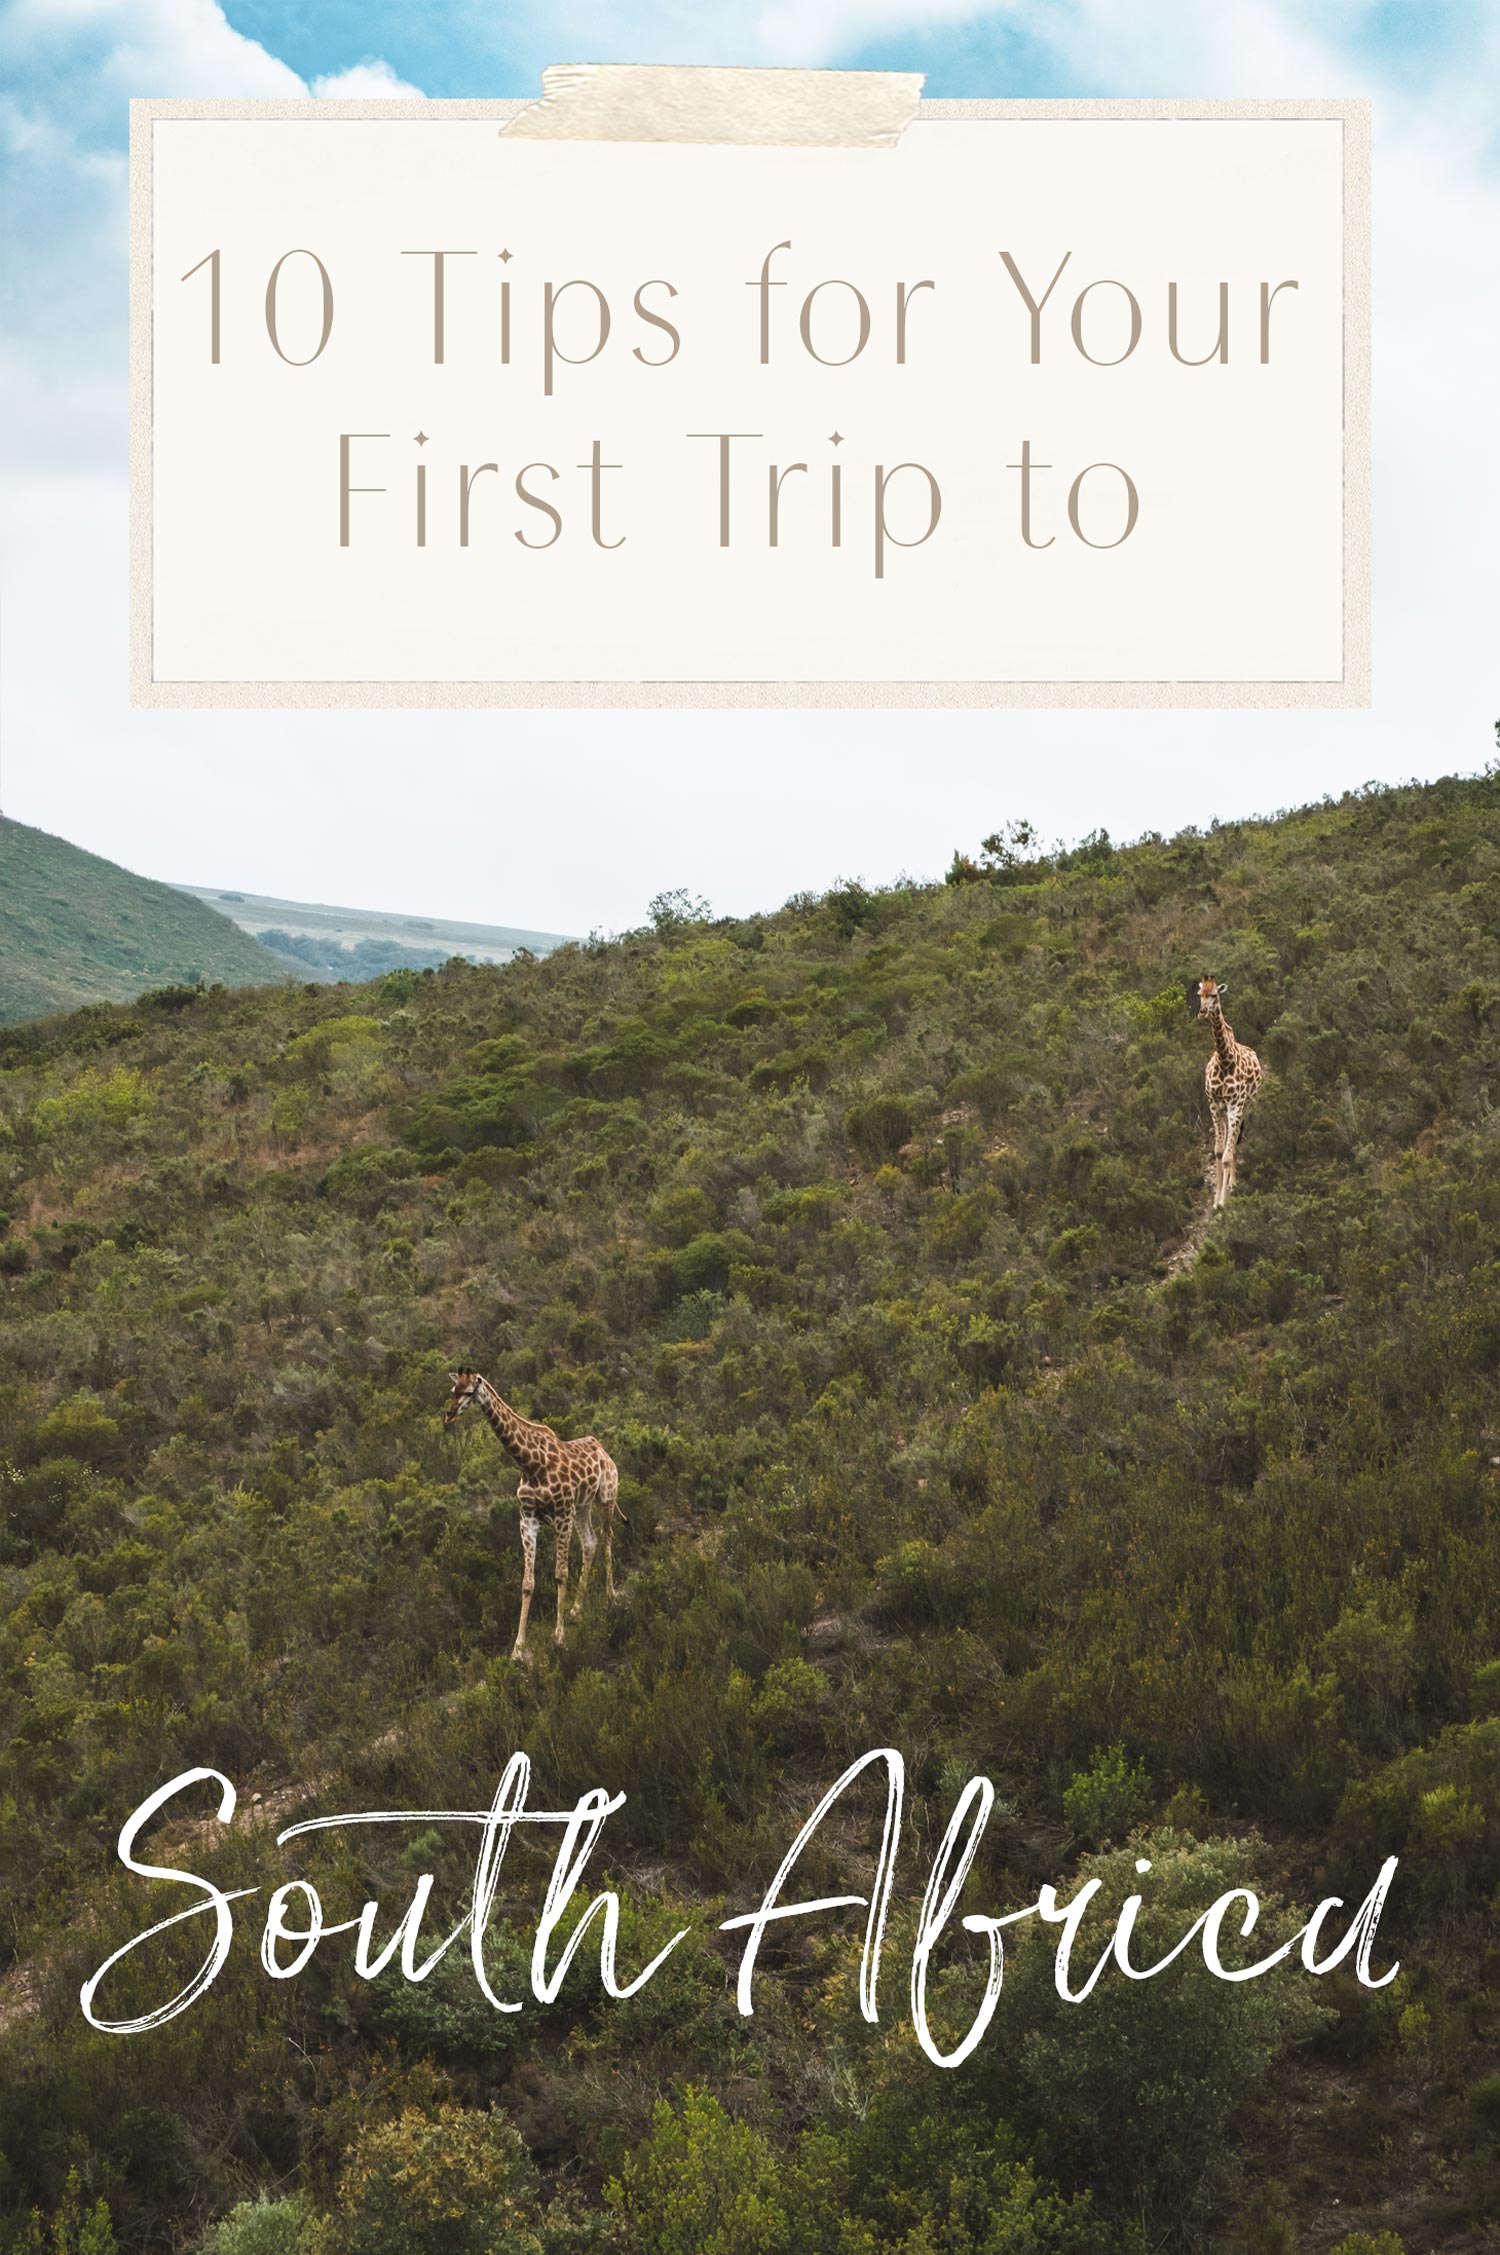 10 tips for your first trip to south africa